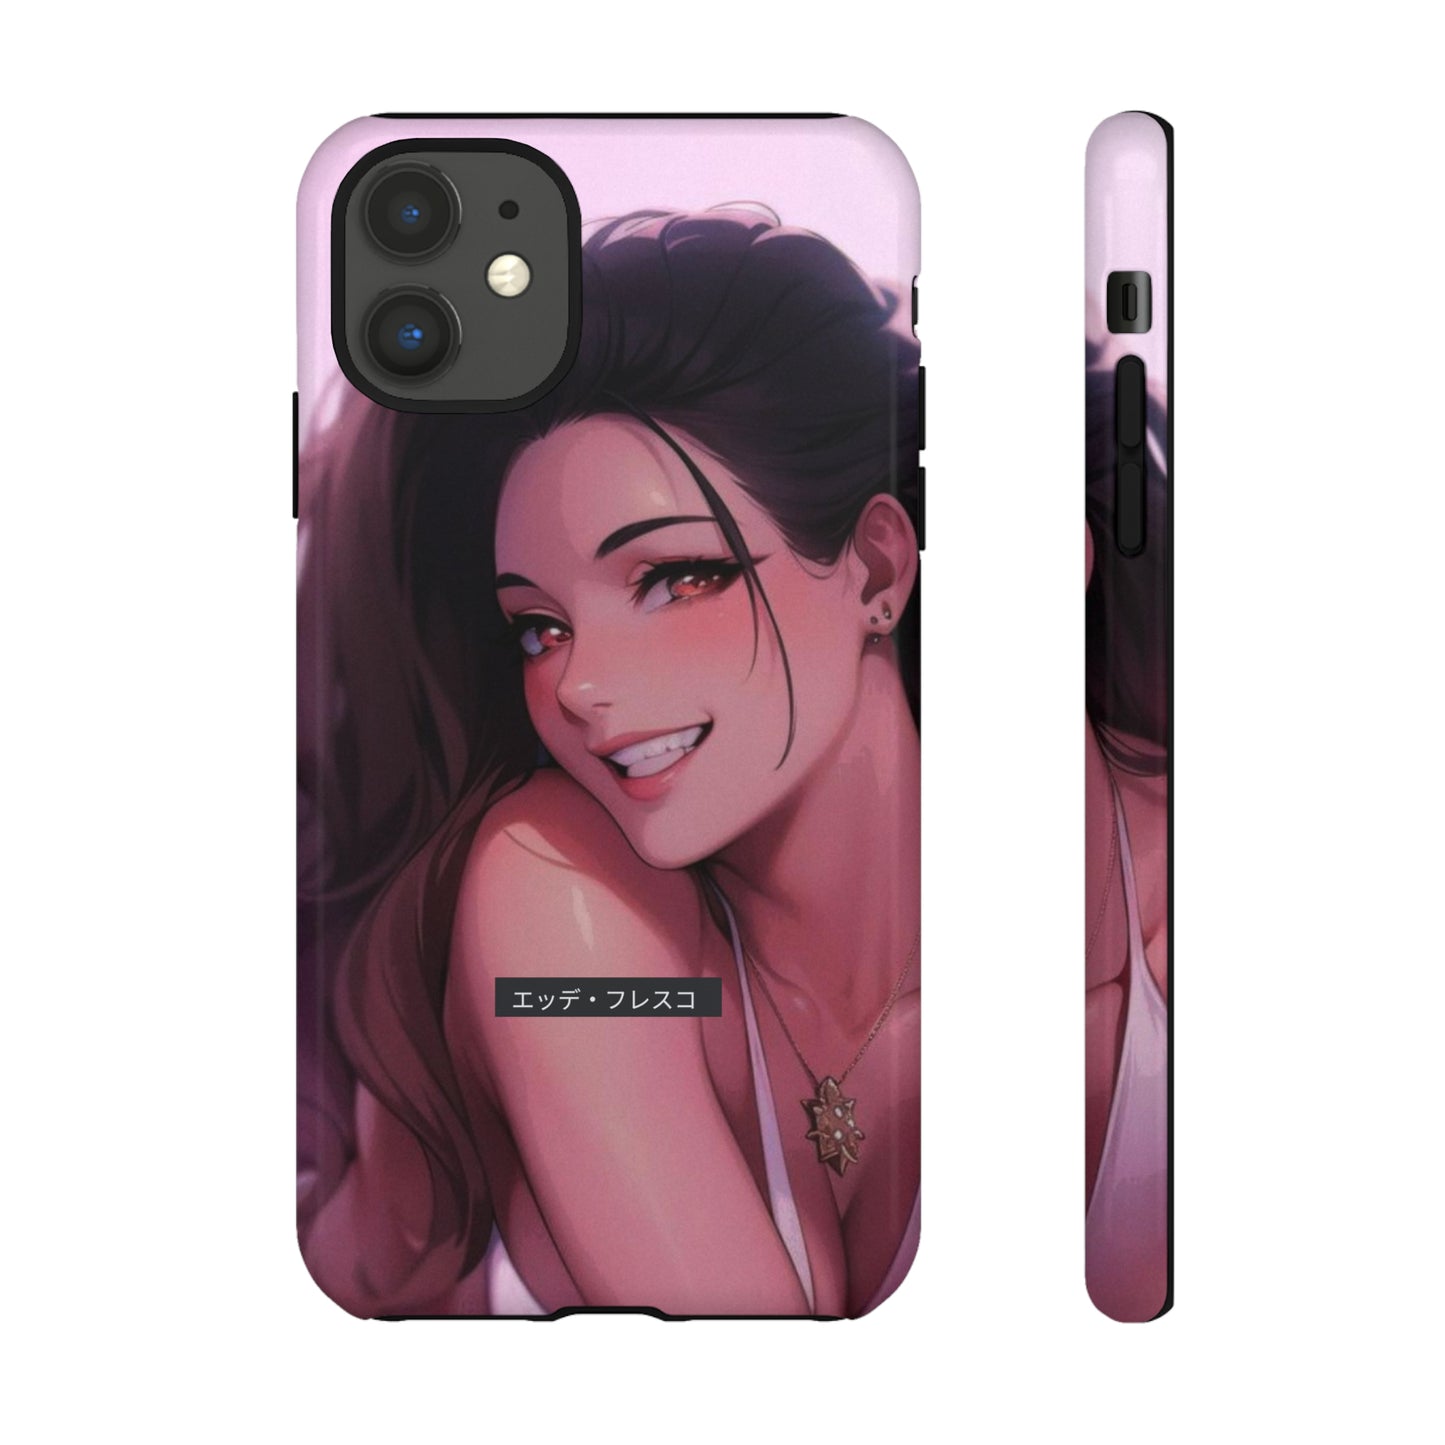 Anime Style Art Tough Cases- "80s Chick"